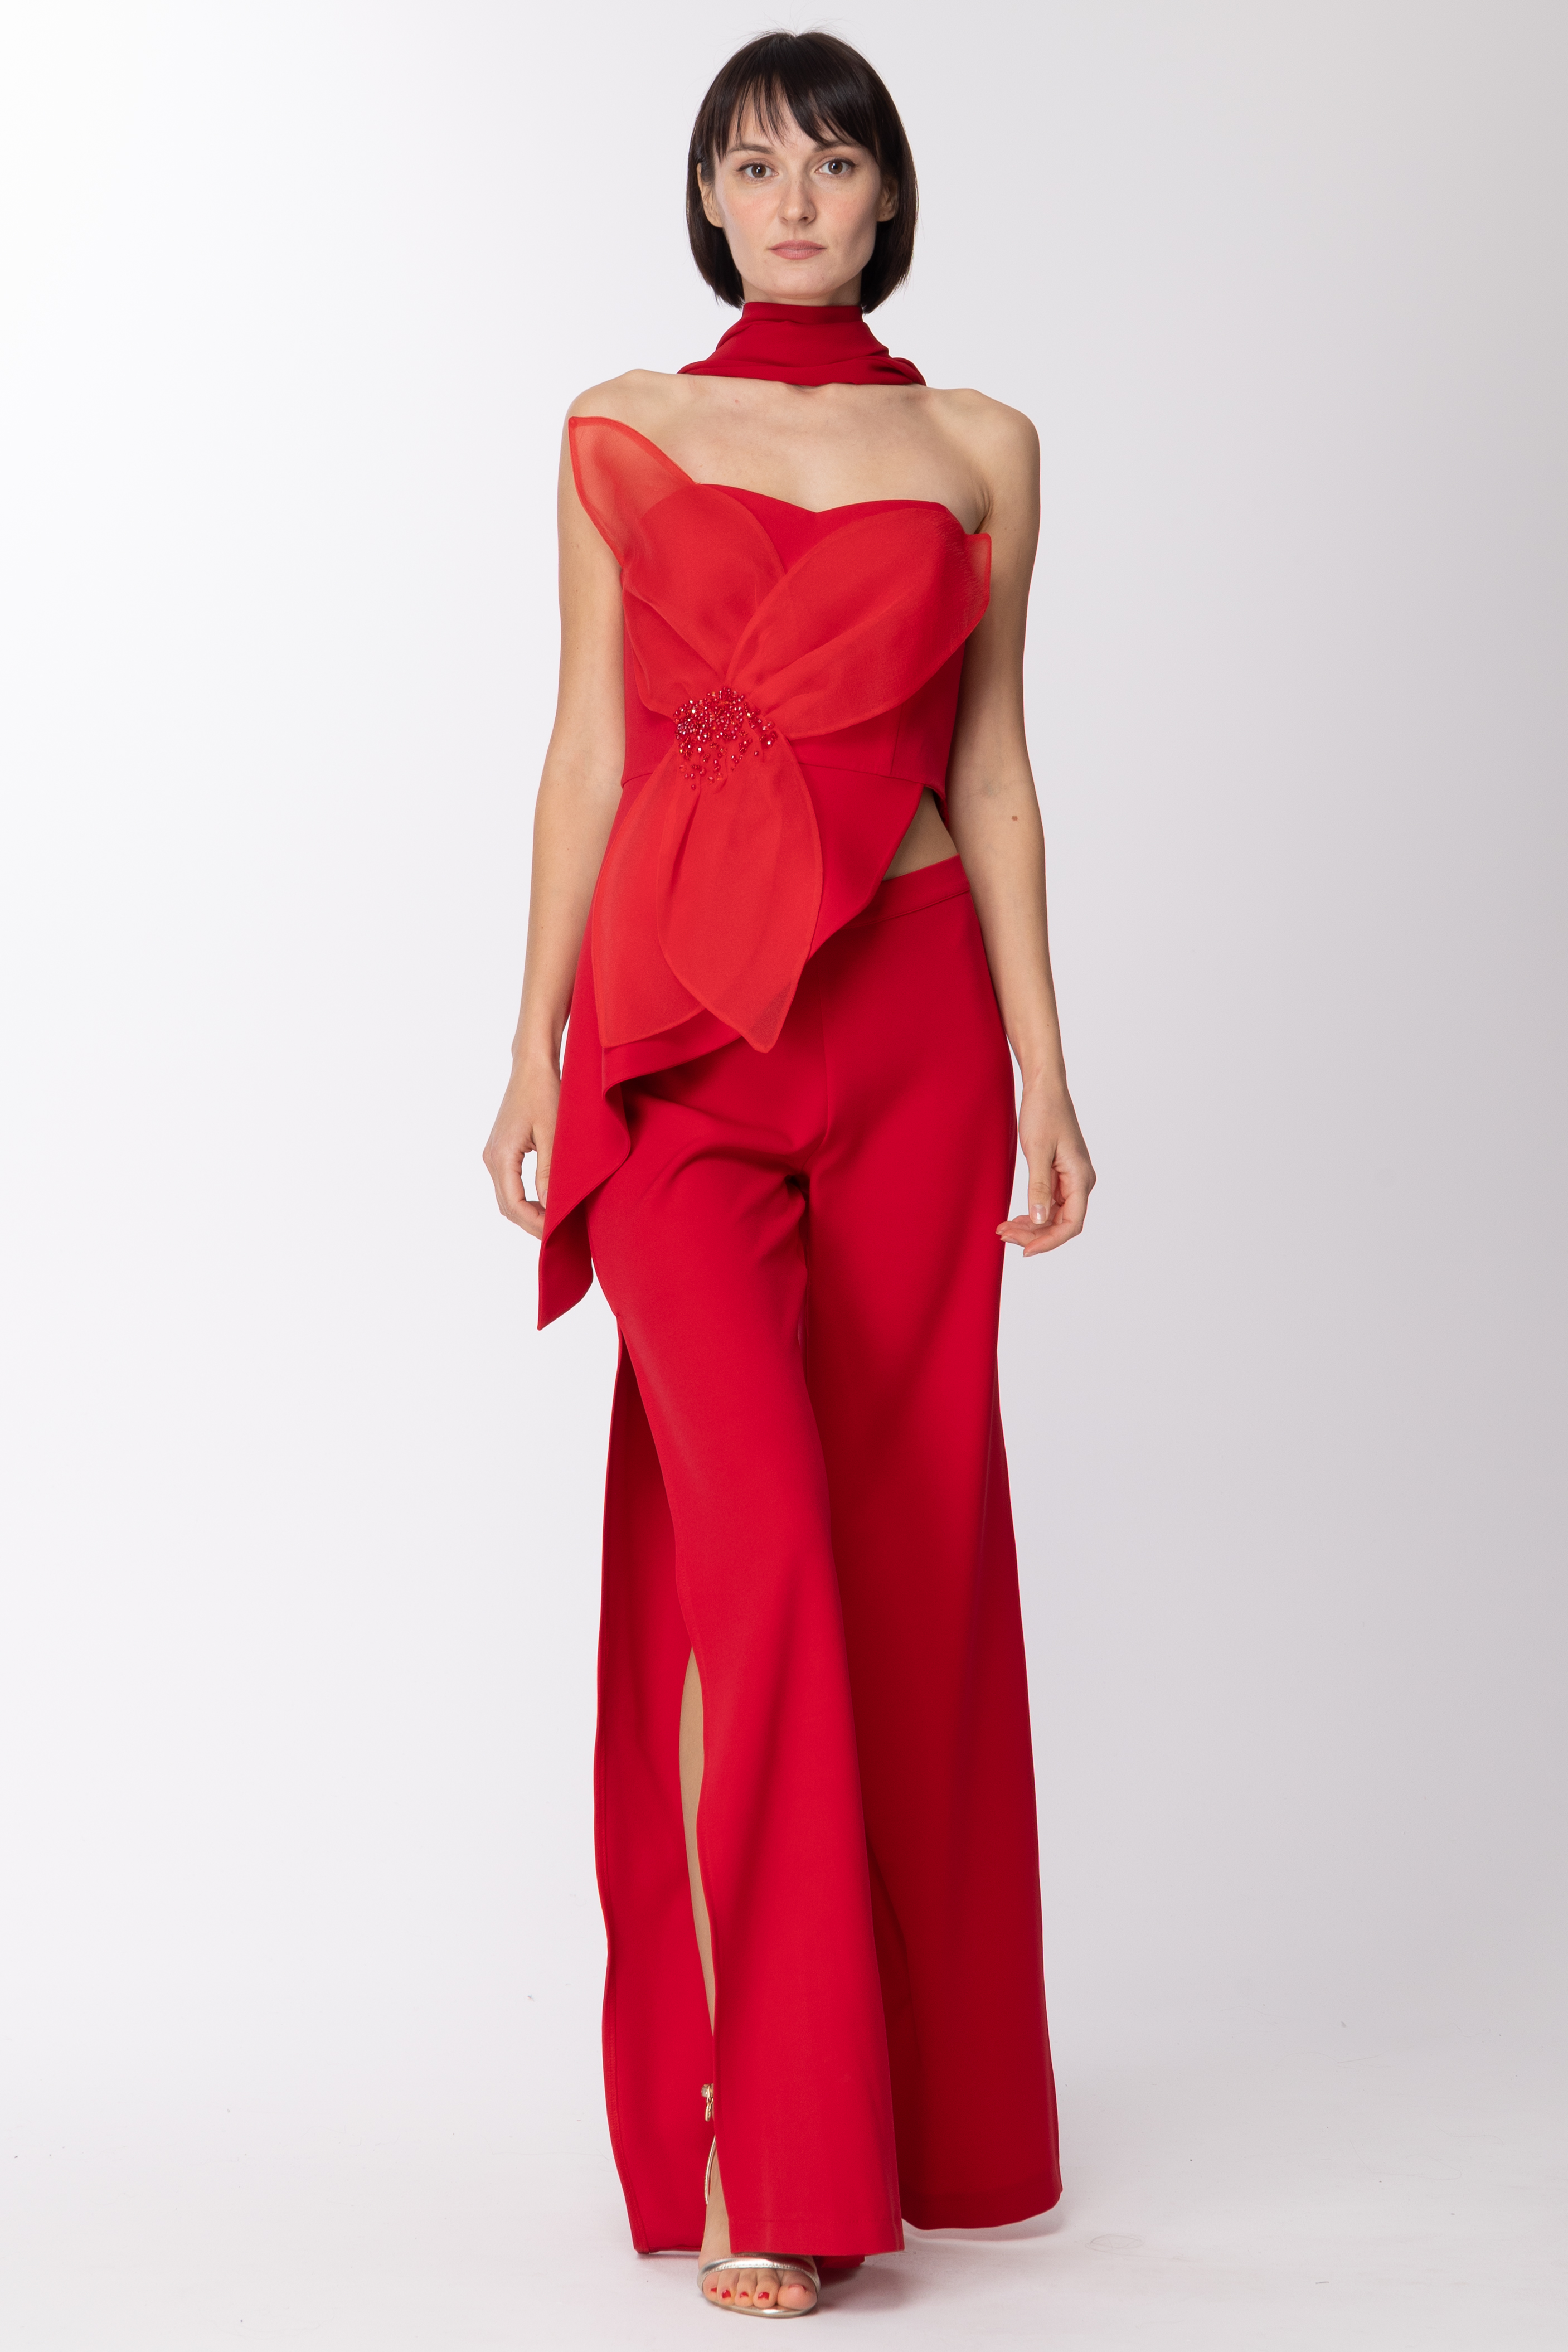 Preview: Fabiana Ferri Bustier top + trousers with slits Rosso